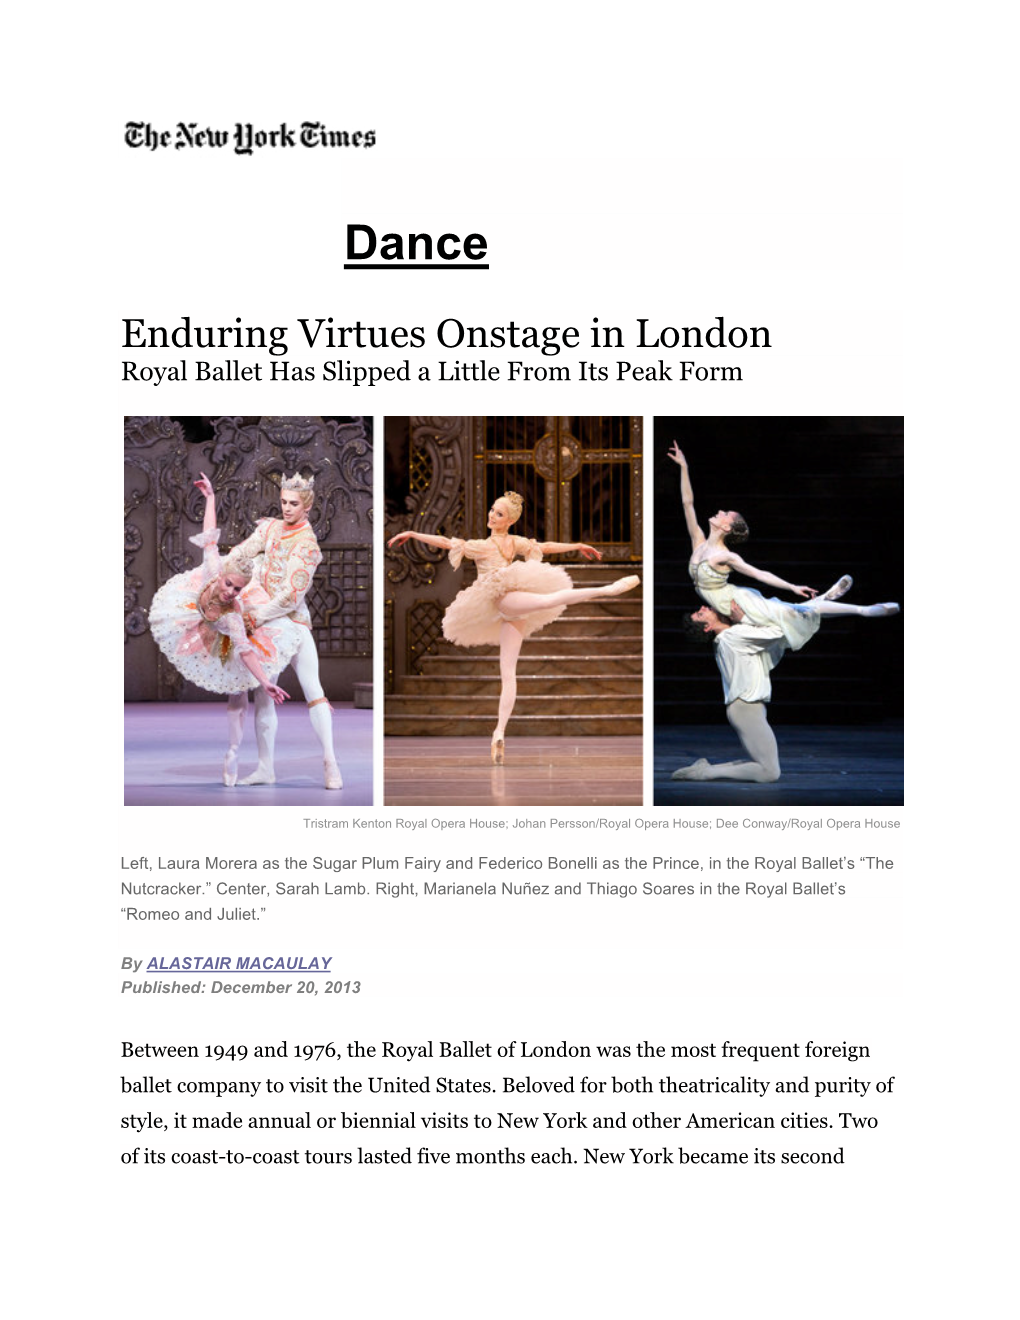 Enduring Virtues Onstage in London. Royal Ballet Has Slipped a Little From